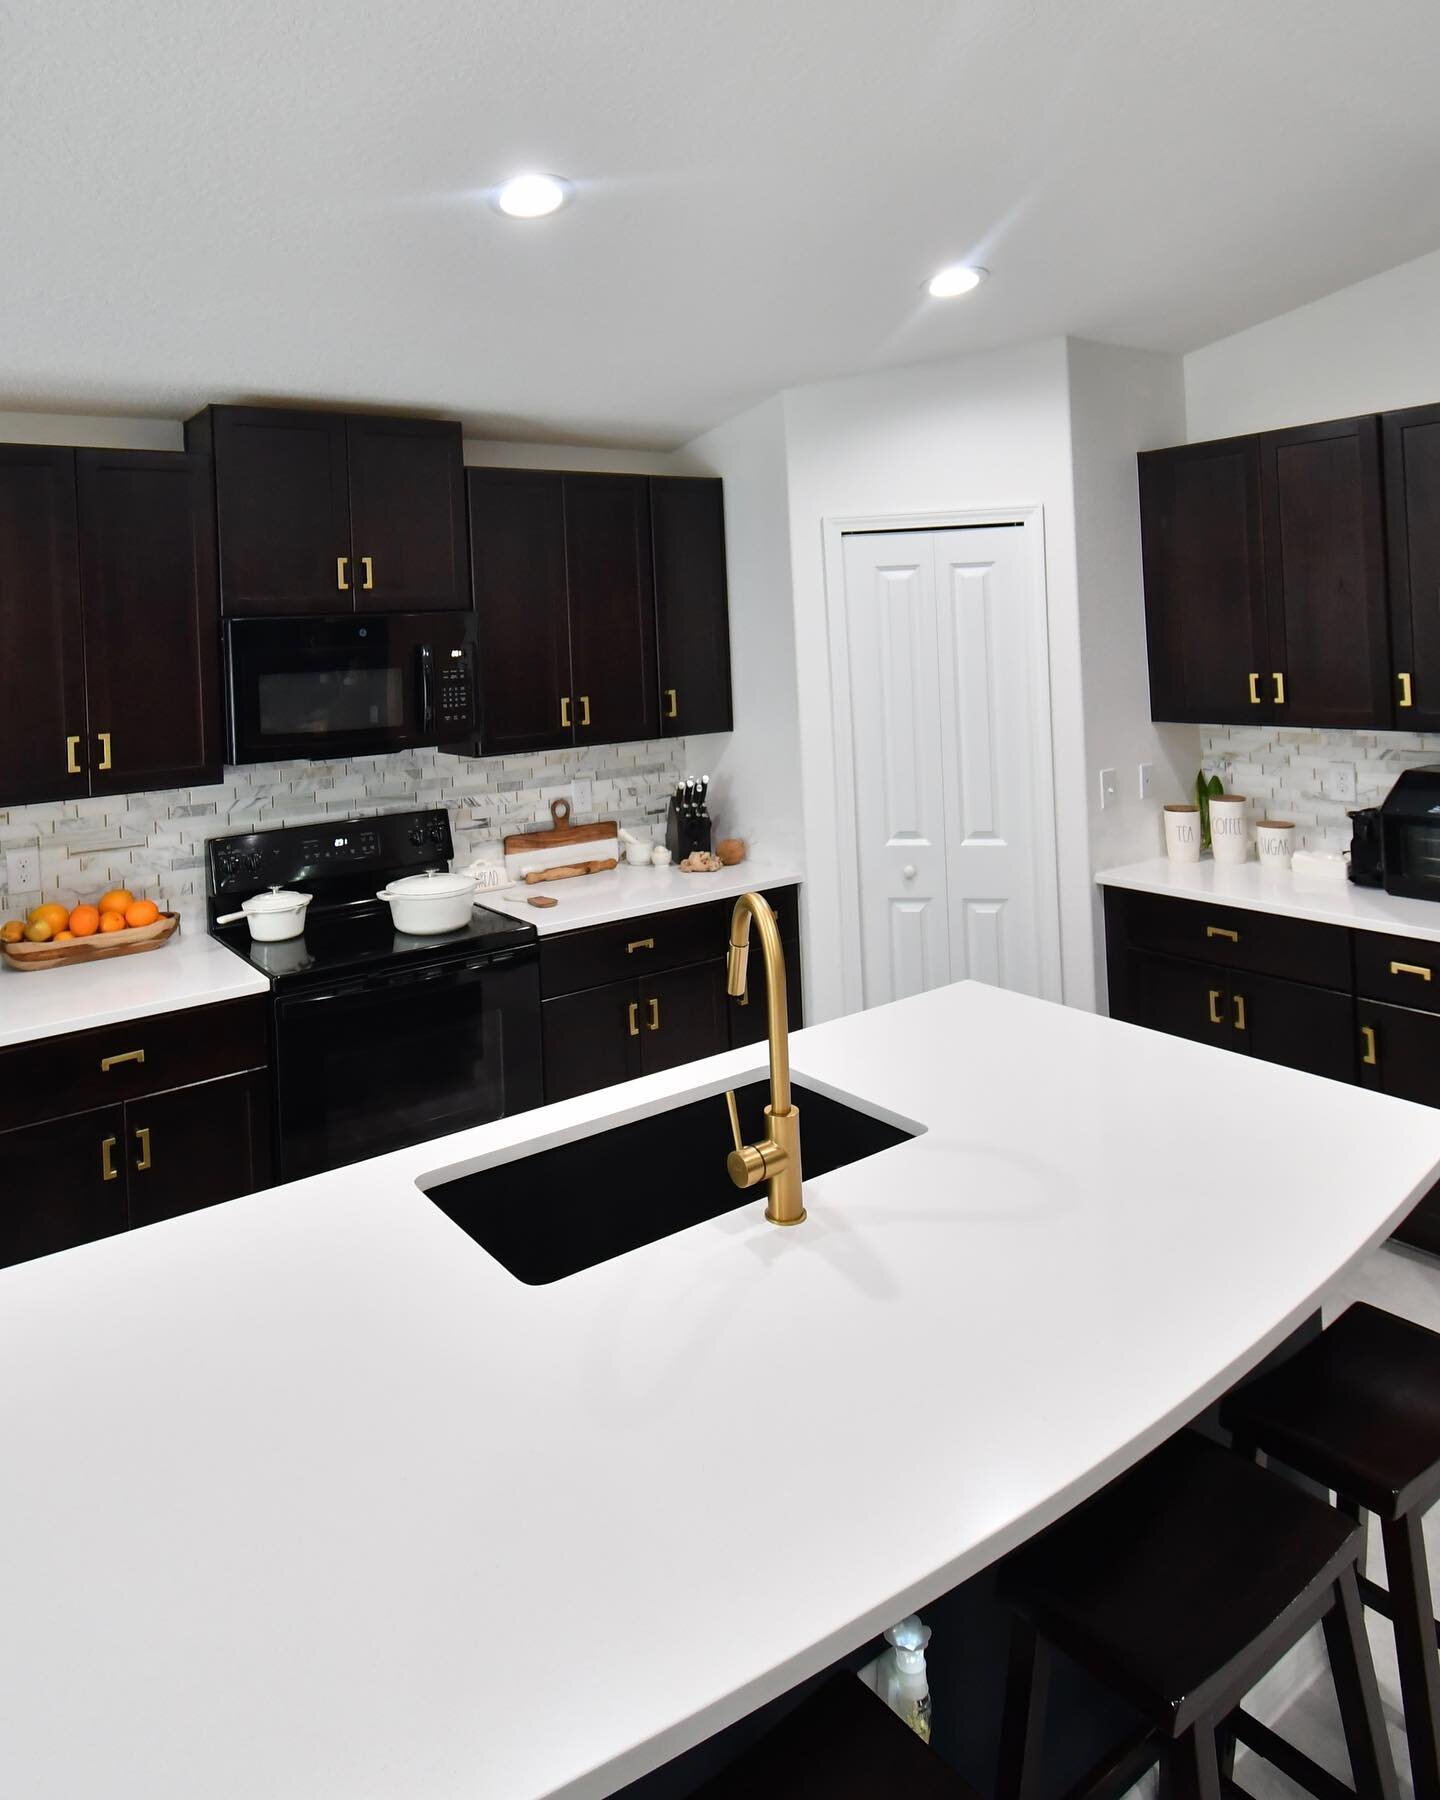 I love a good Before and After, this is our kitchen! It&rsquo;s amazing how a space can be transformed with just a few changes- in this case we only kept the original cabinets. We changed the faucet, sink, countertops, backsplash, cabinet pulls, wall